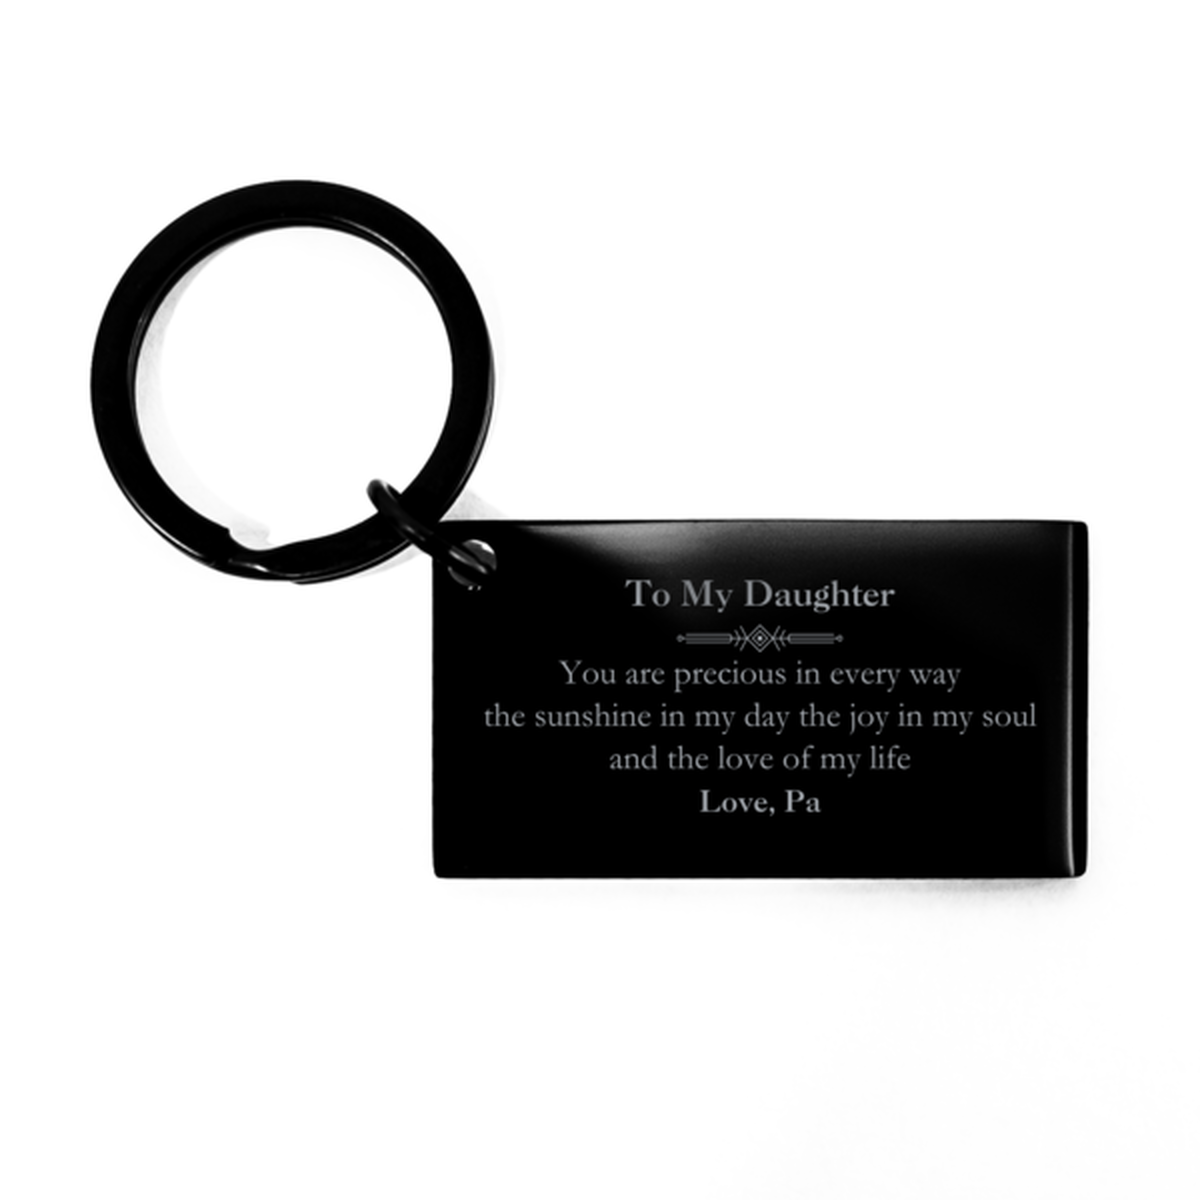 Graduation Gifts for Daughter Keychain Present from Pa, Christmas Daughter Birthday Gifts Daughter You are precious in every way the sunshine in my day. Love, Pa